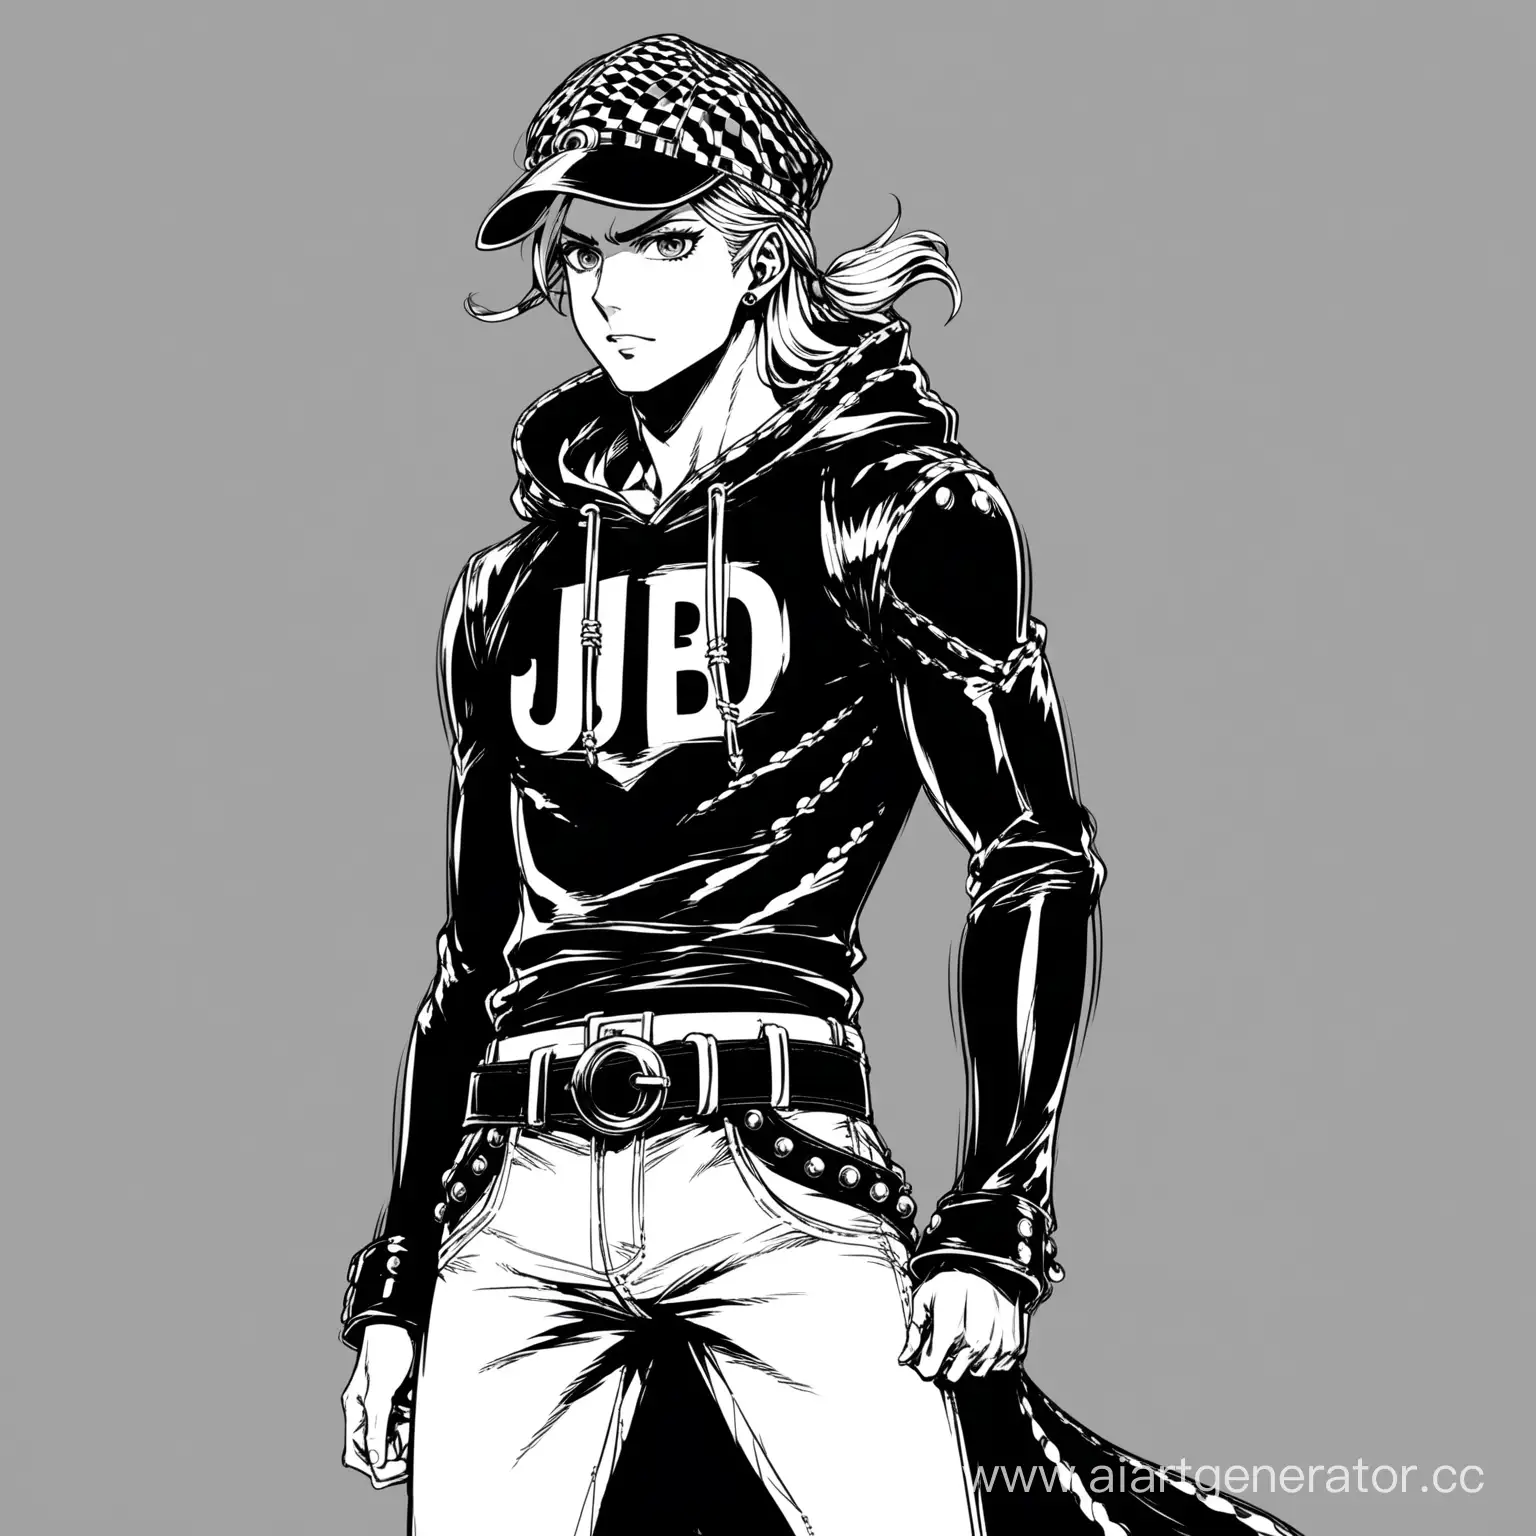 Youth-in-Black-Clothing-Inspired-by-JJBA-Steel-Ball-Run-in-Black-and-White-Style